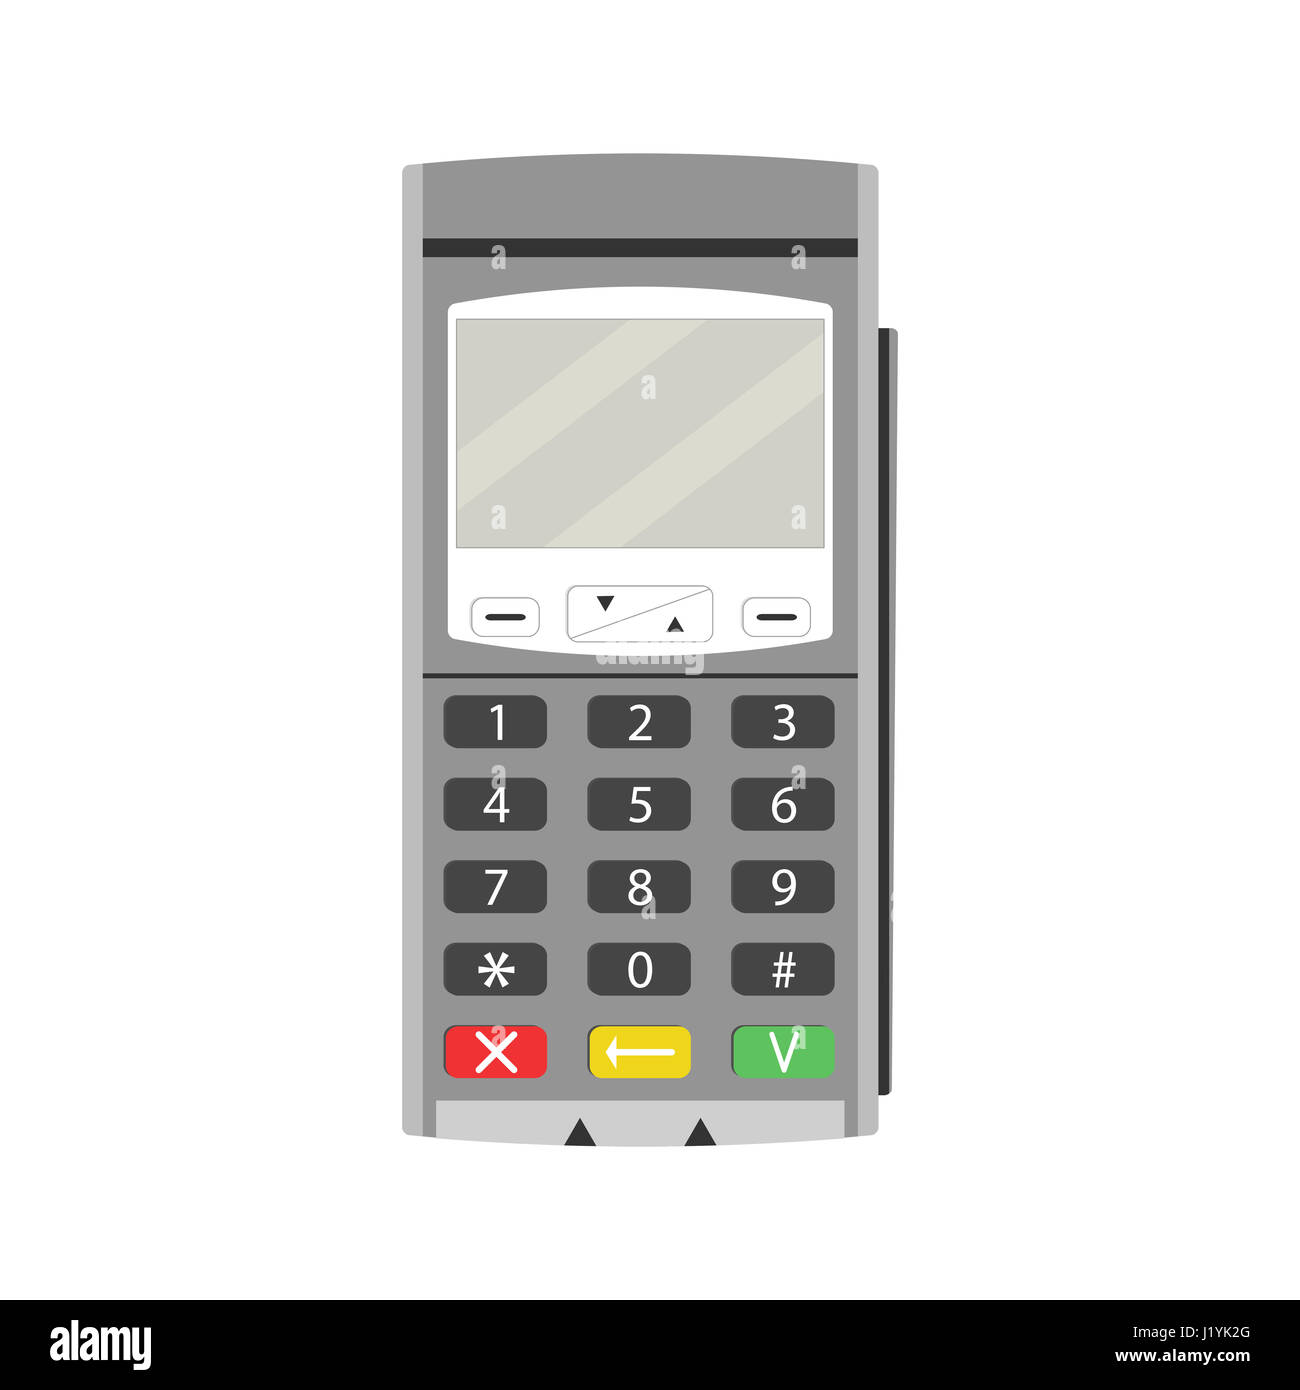 Terminal for payment by card. Payment machine, credit card and pos terminal, vector credit card machine, illustration of card terminal Stock Photo